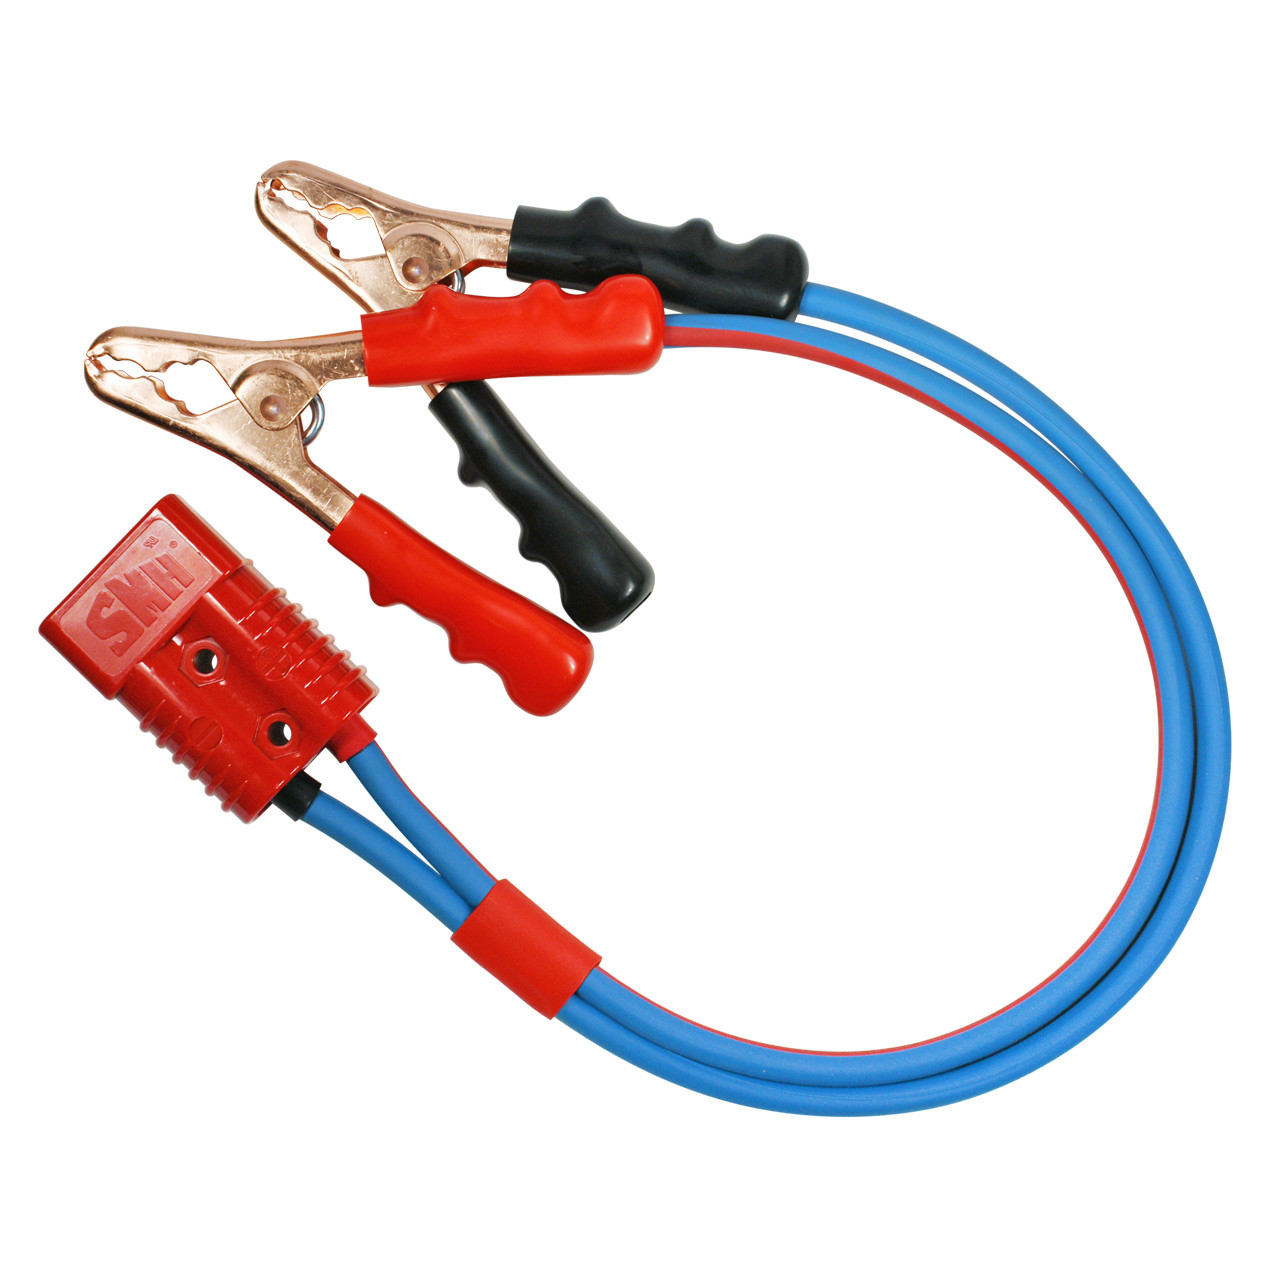 4 AWG Arctic Superflex Blue Twin Conductor Wire